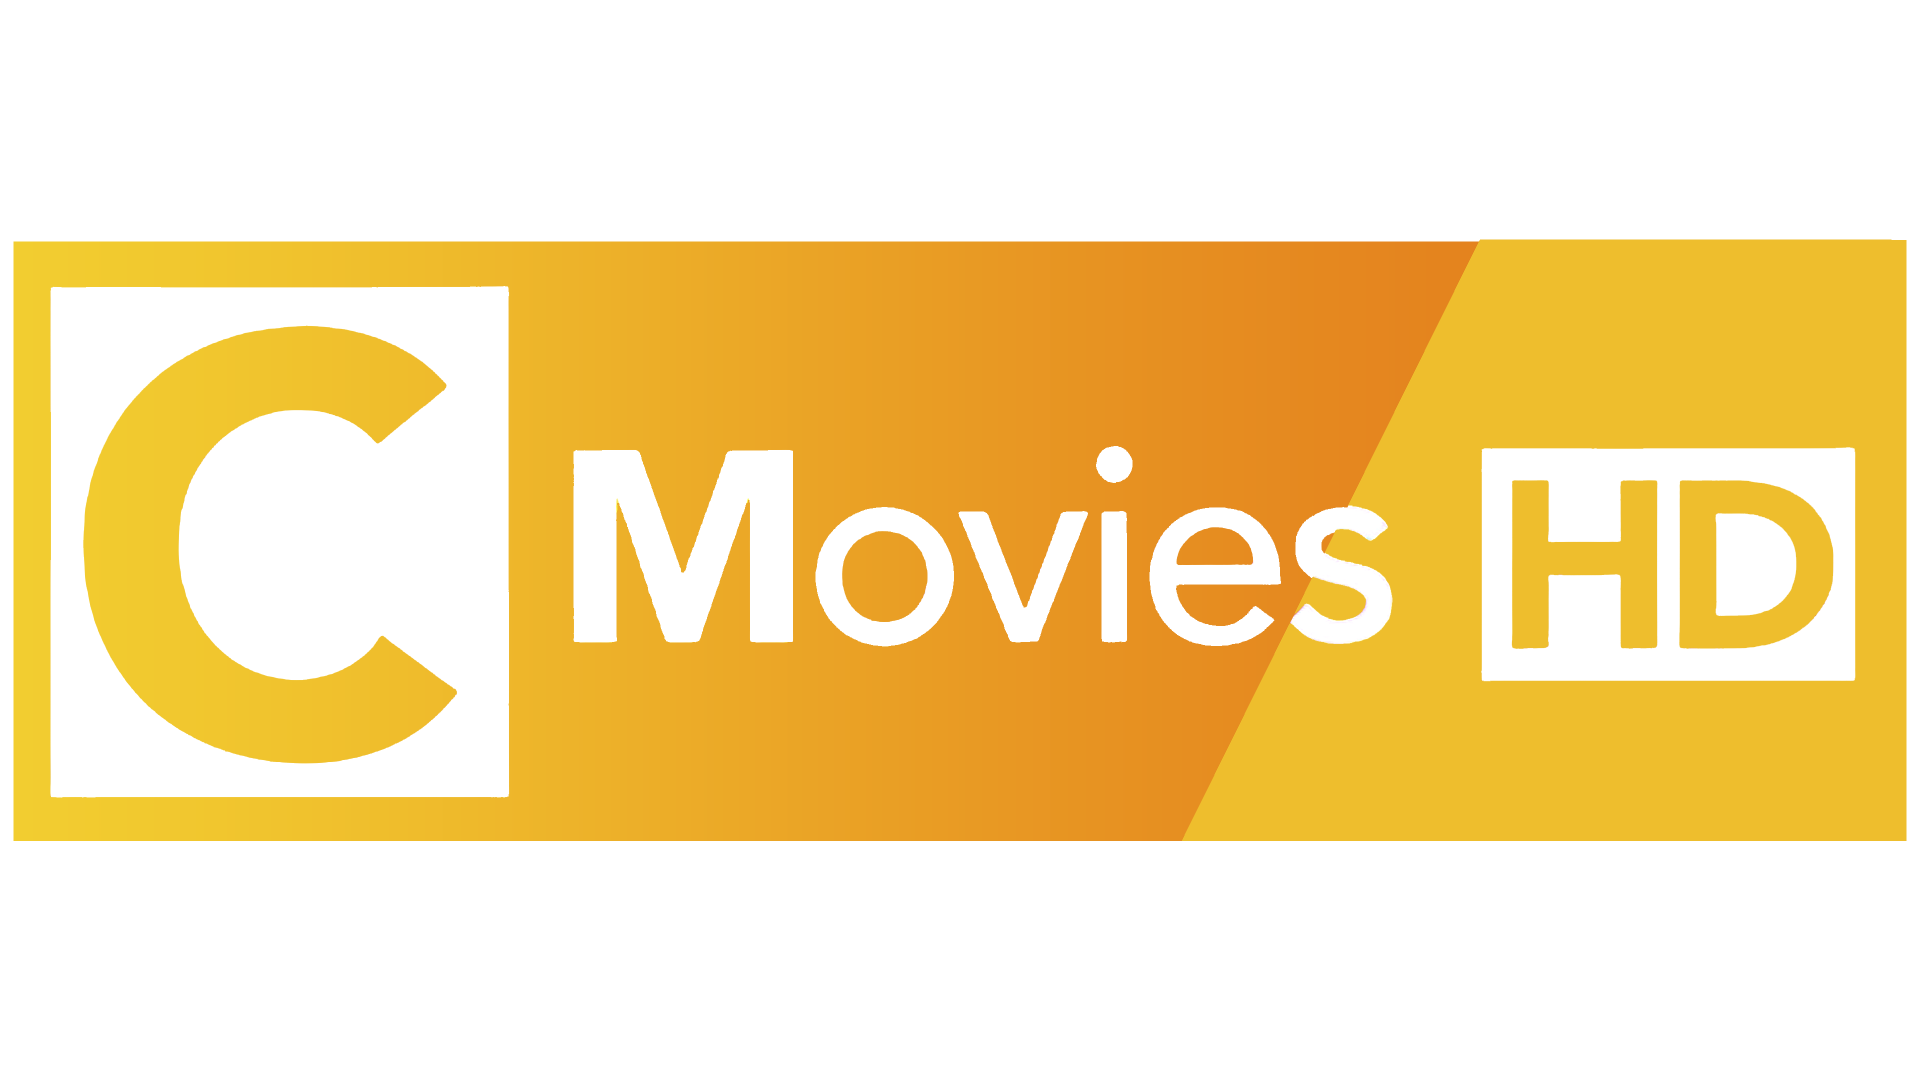 CMovies Alternatives For Watching On-line Movies & Collection